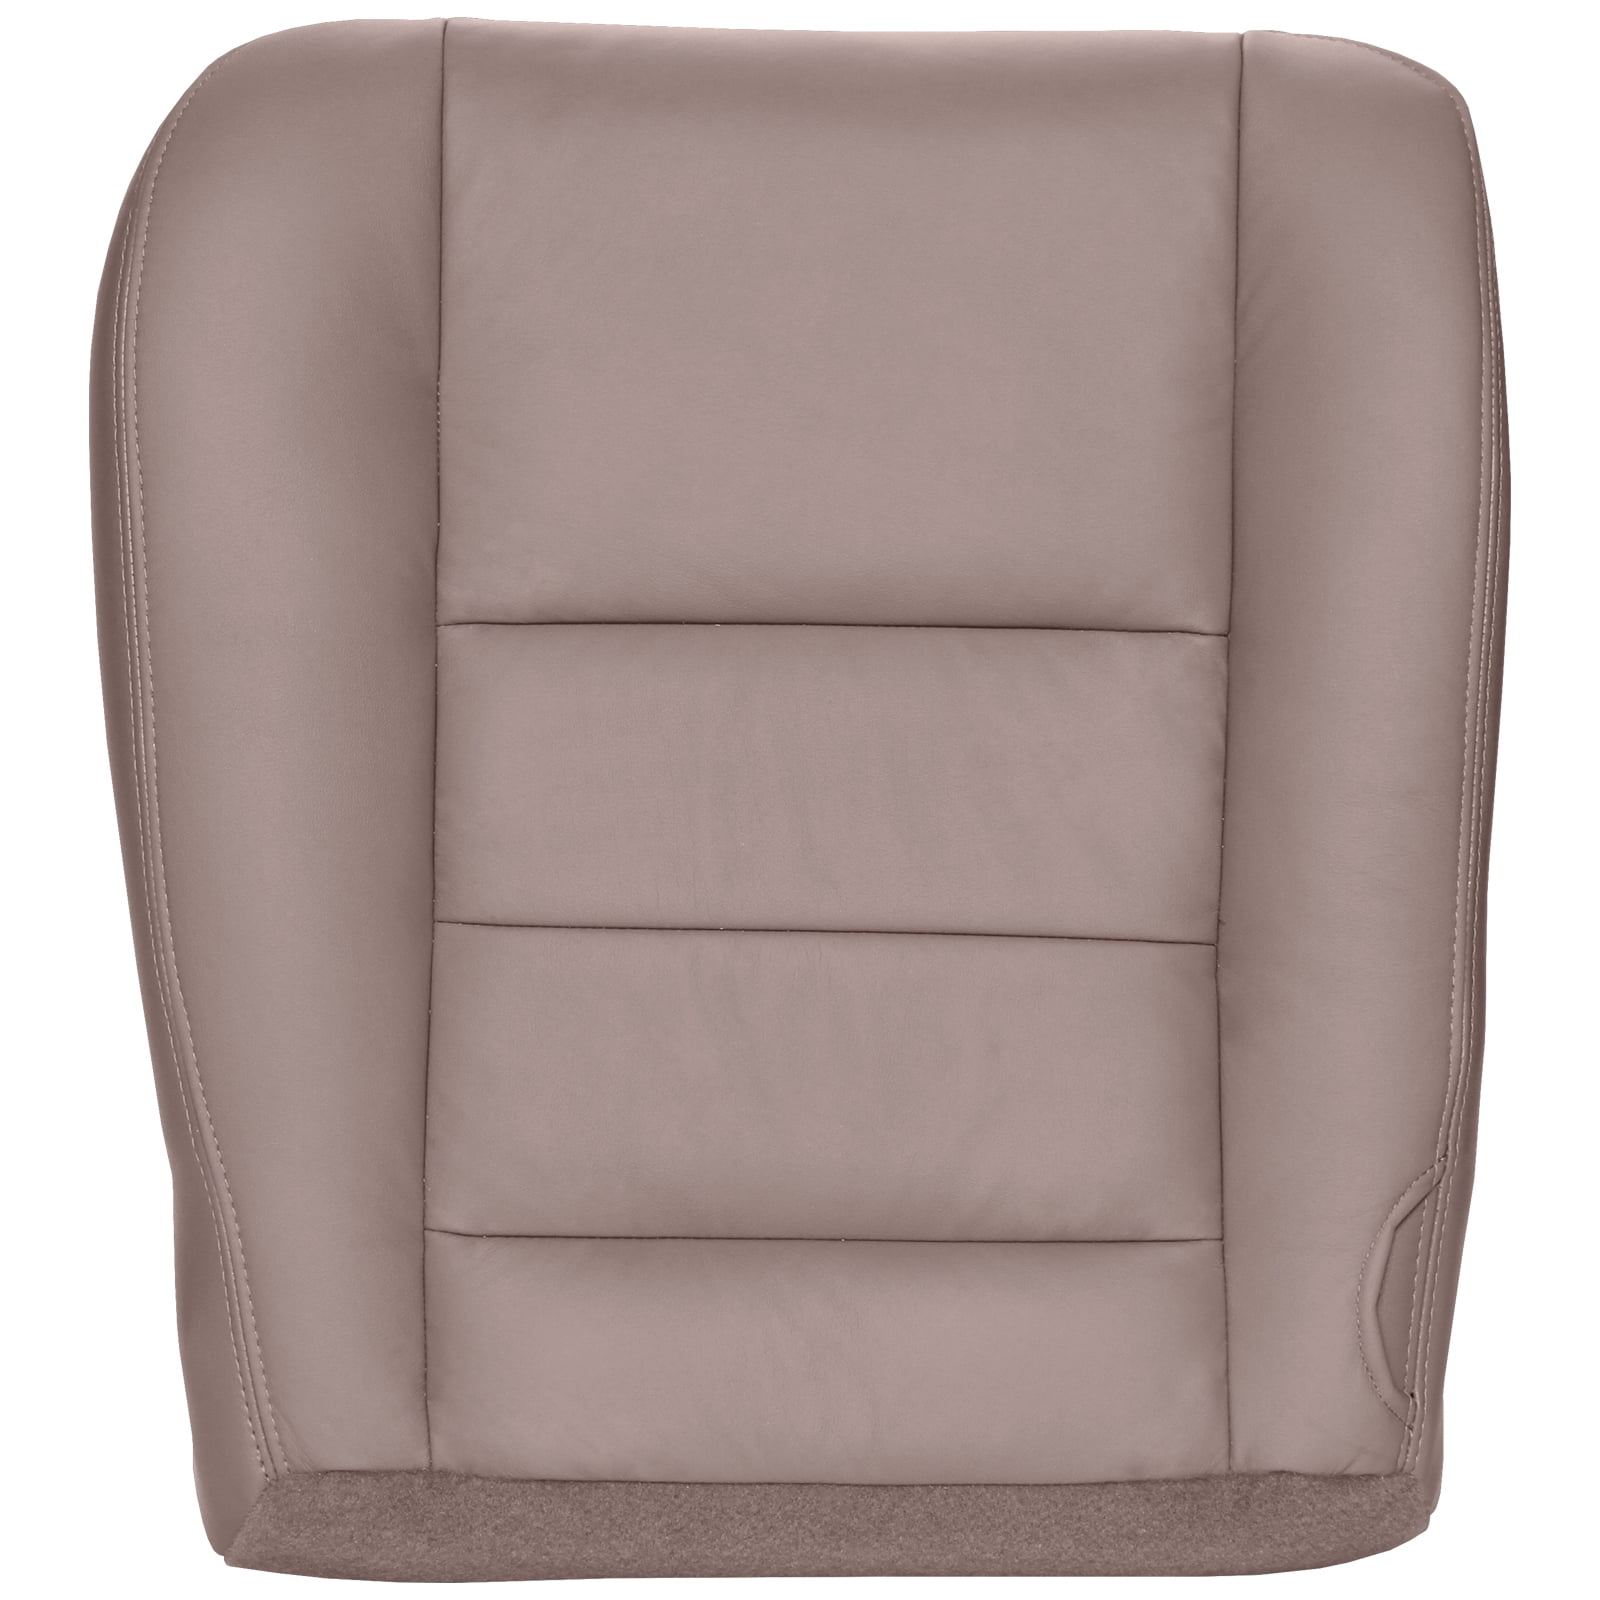 2003 04 05 2007  Ford F250 F350 Lariat Driver Bottom Seat Cover Tan Color Vinyl